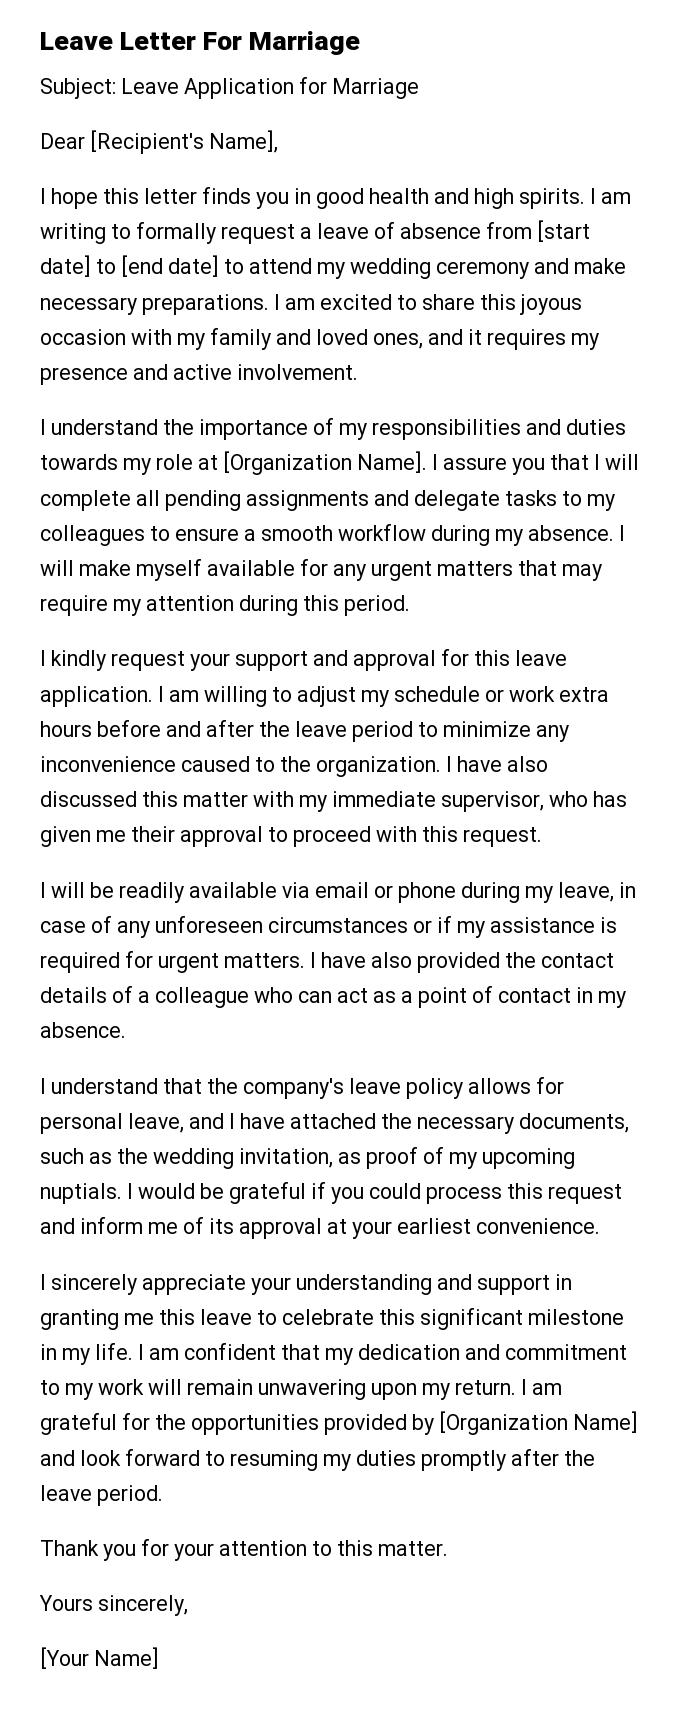 Leave Letter For Marriage